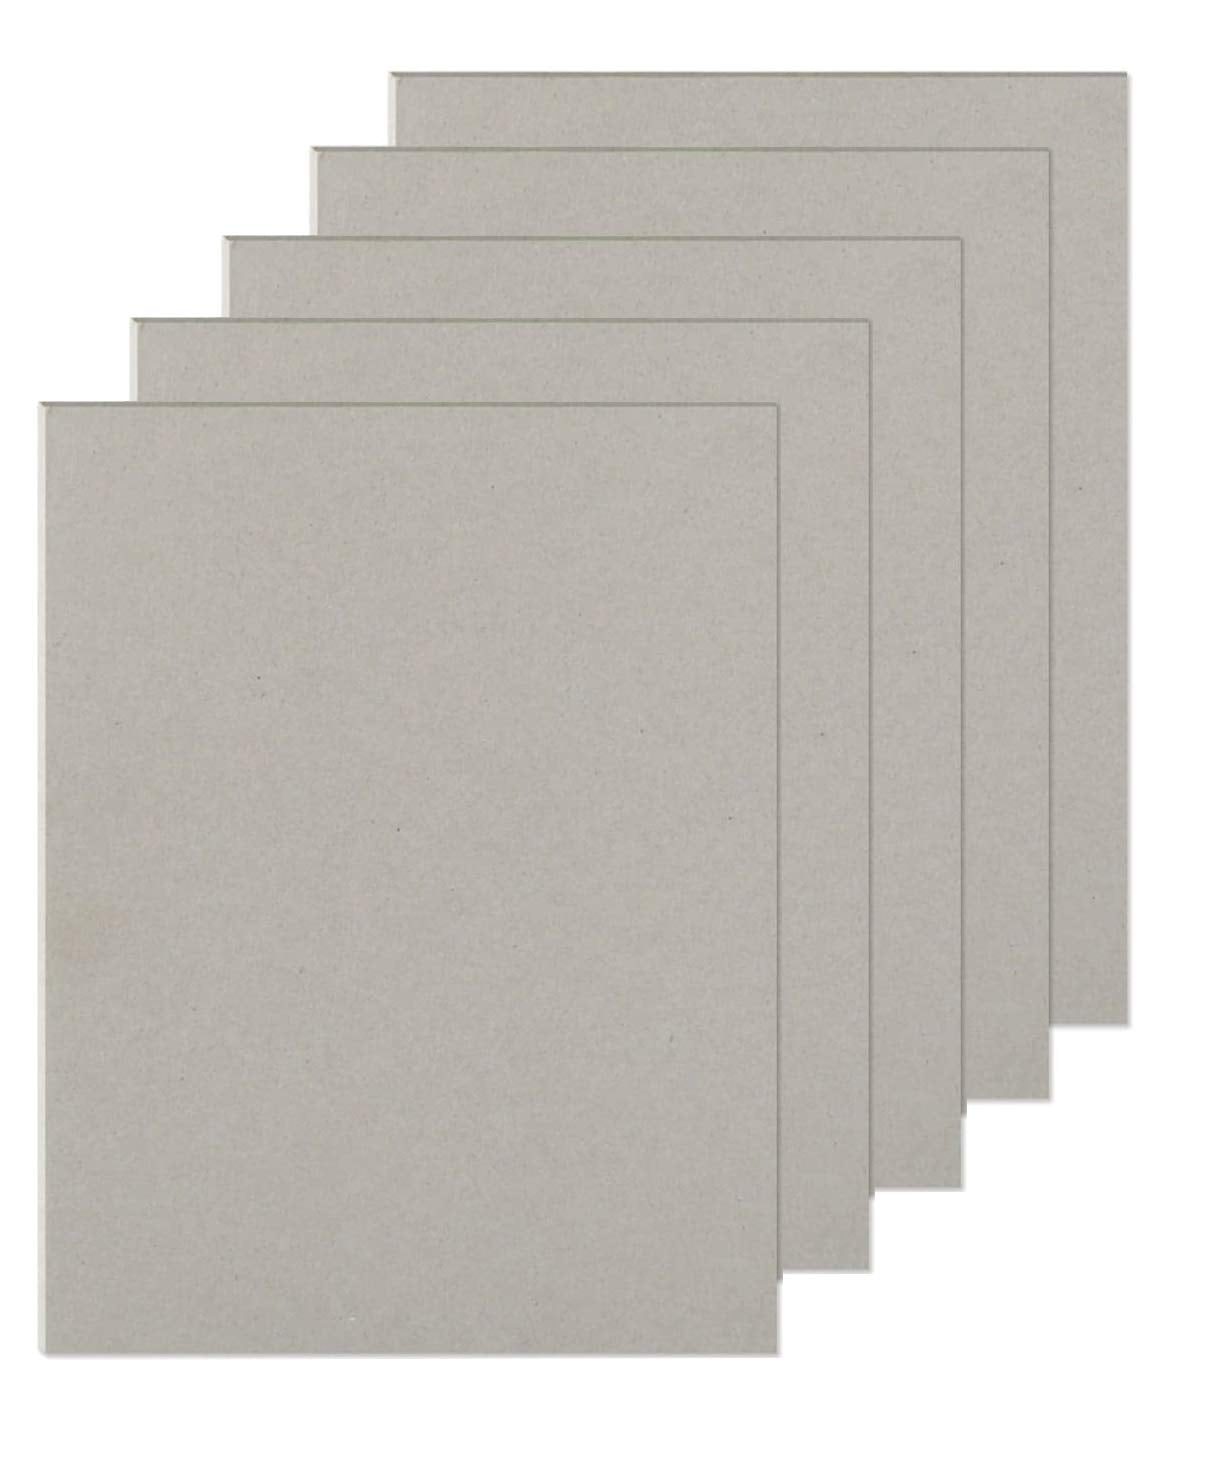 2mm 1200 Gsm Thickness Gray Paperboard Stocklot Stiff Cardboard Paper Sheets